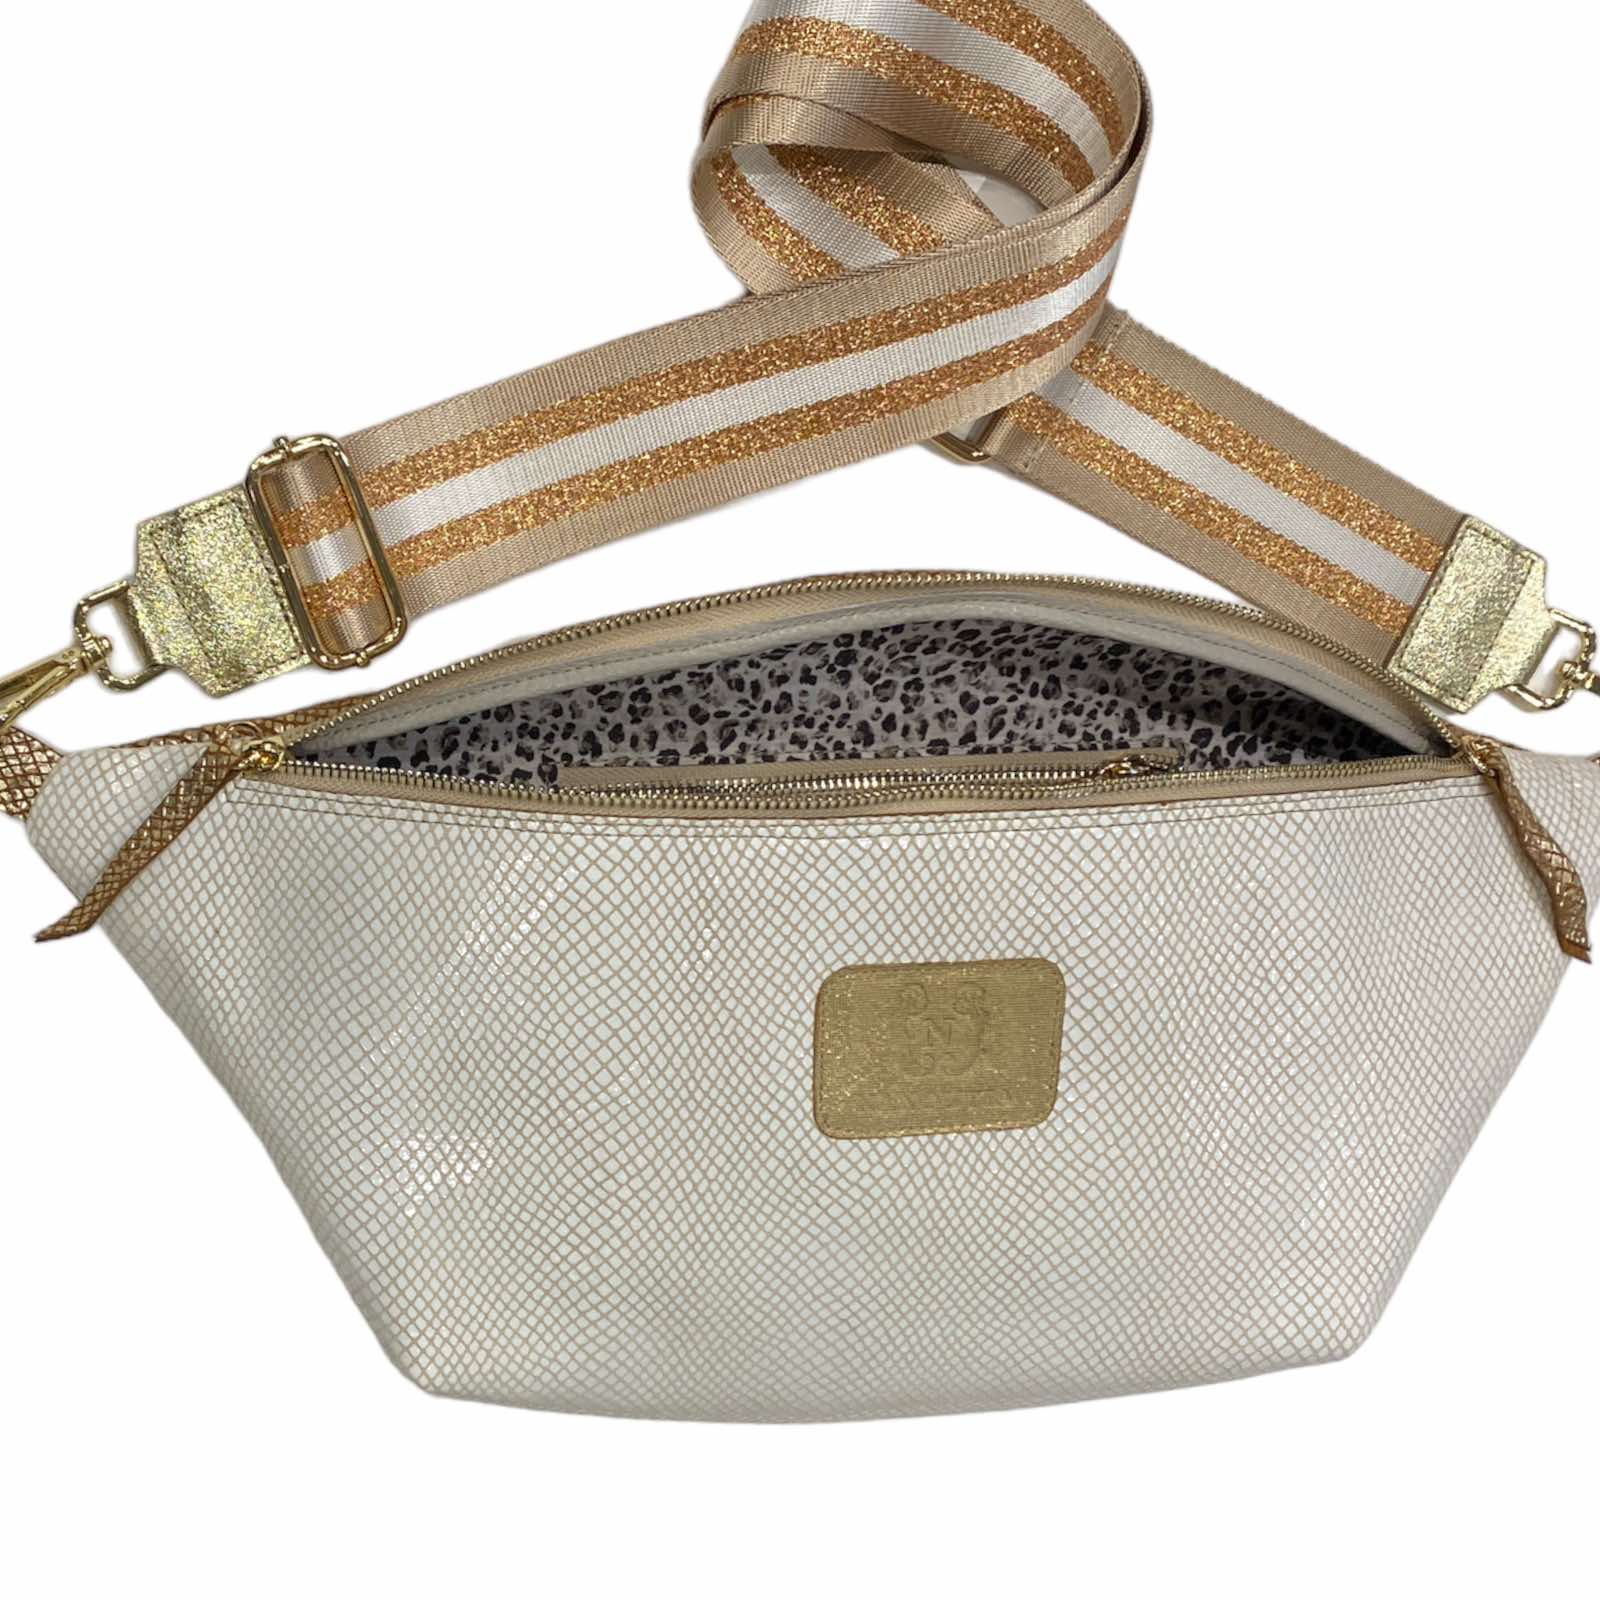 XXL white mermaid and gold leather belt bag